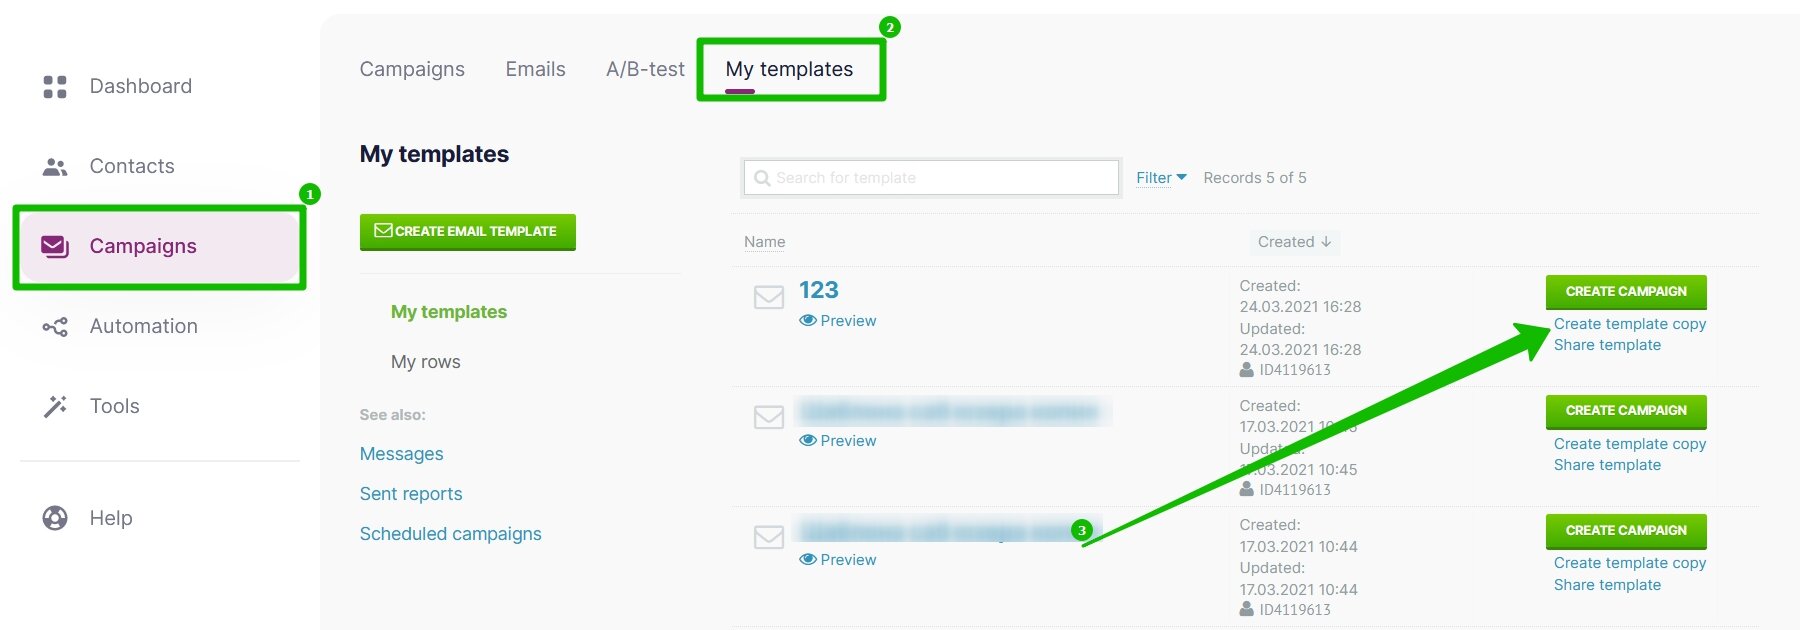 The link to create a template copy in the Campaigns Section - in My Templates.